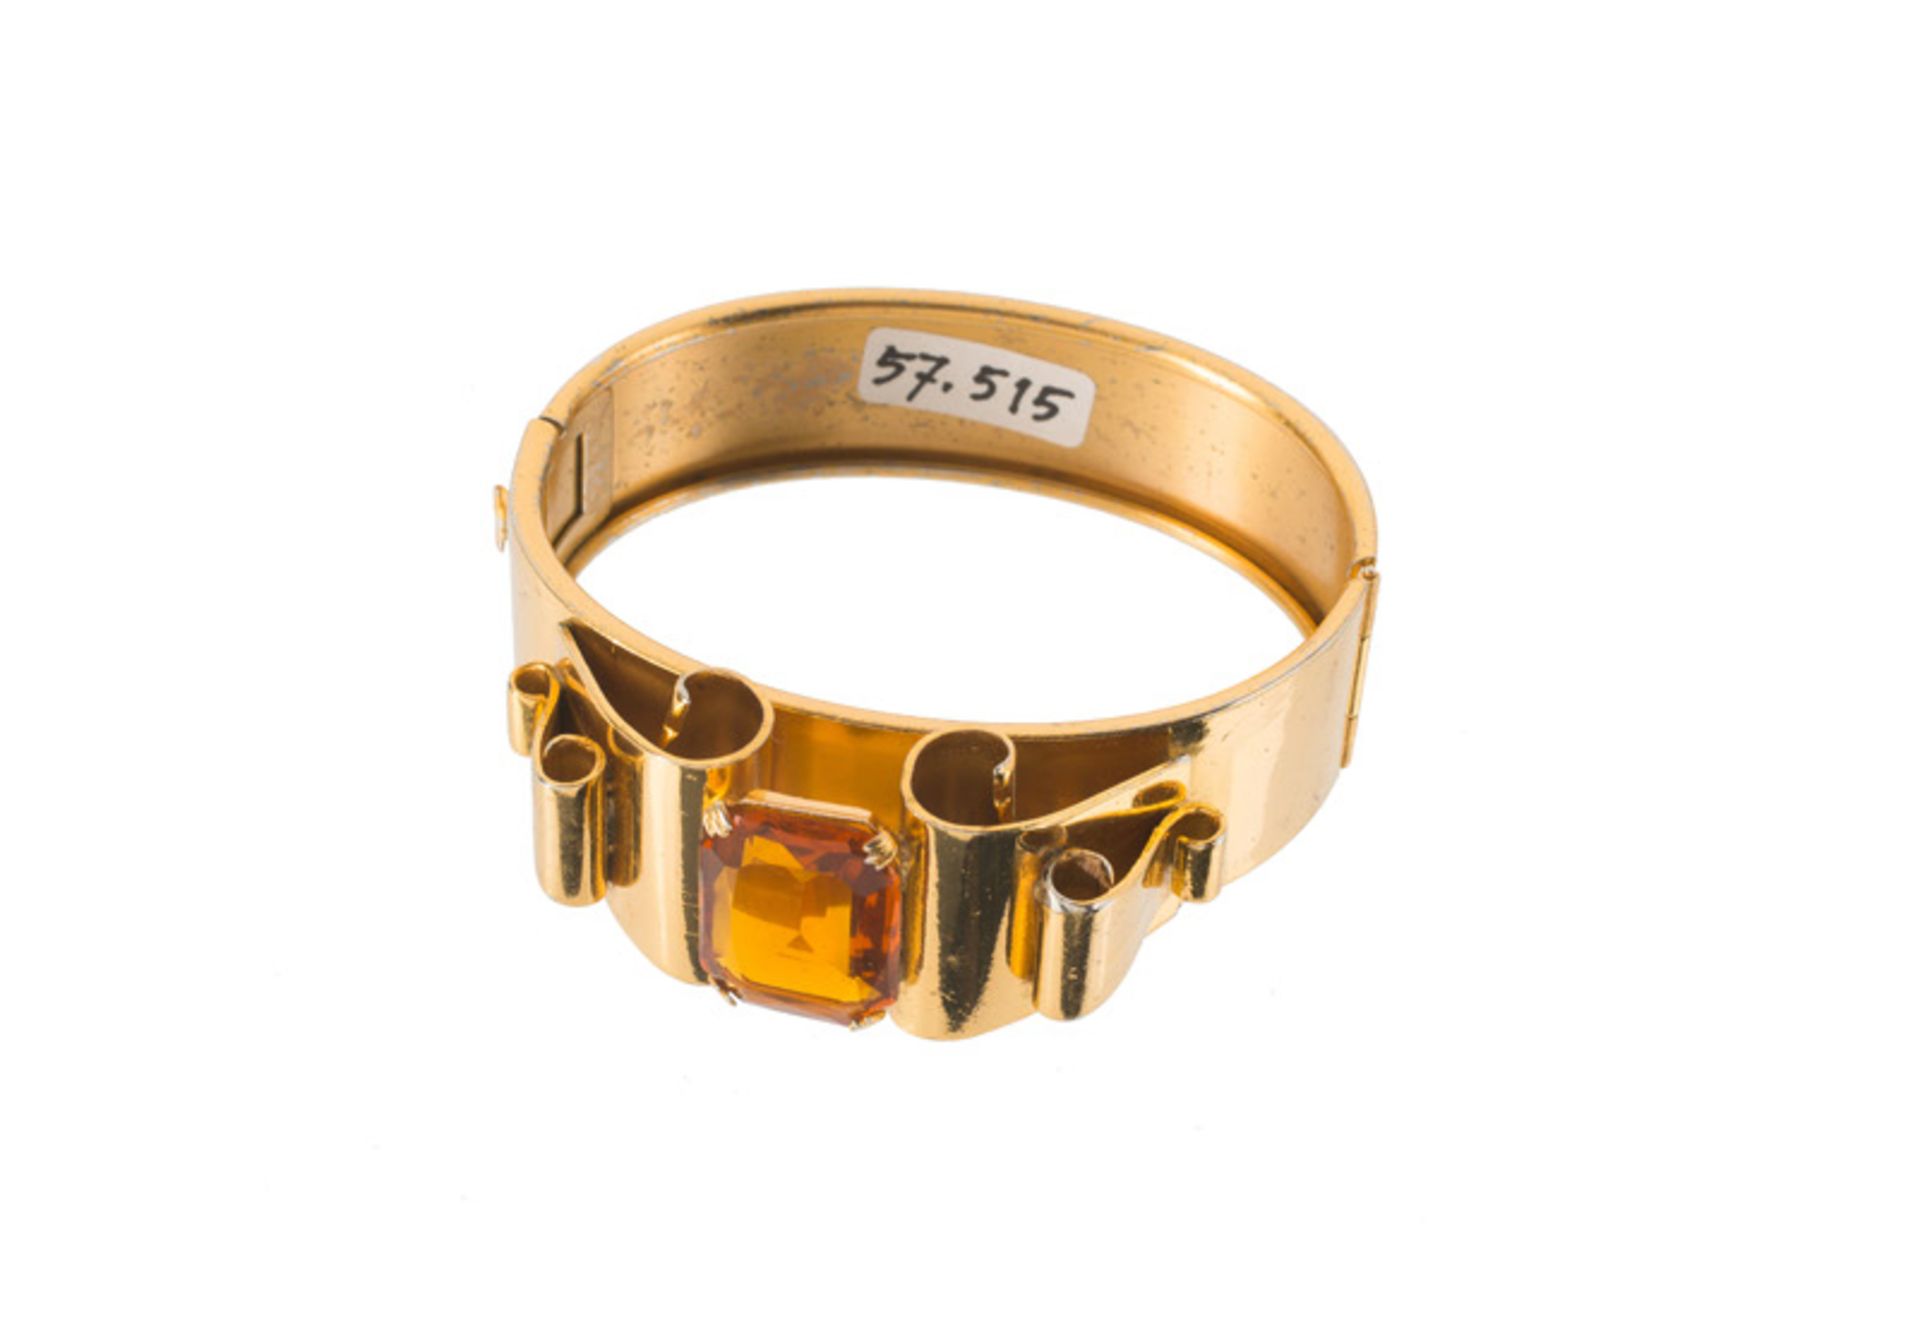 A Coro bracelet set with orange stone. Signed Coro. Inner diam. 6 cm. Some wear to the gold tone. - Image 2 of 2